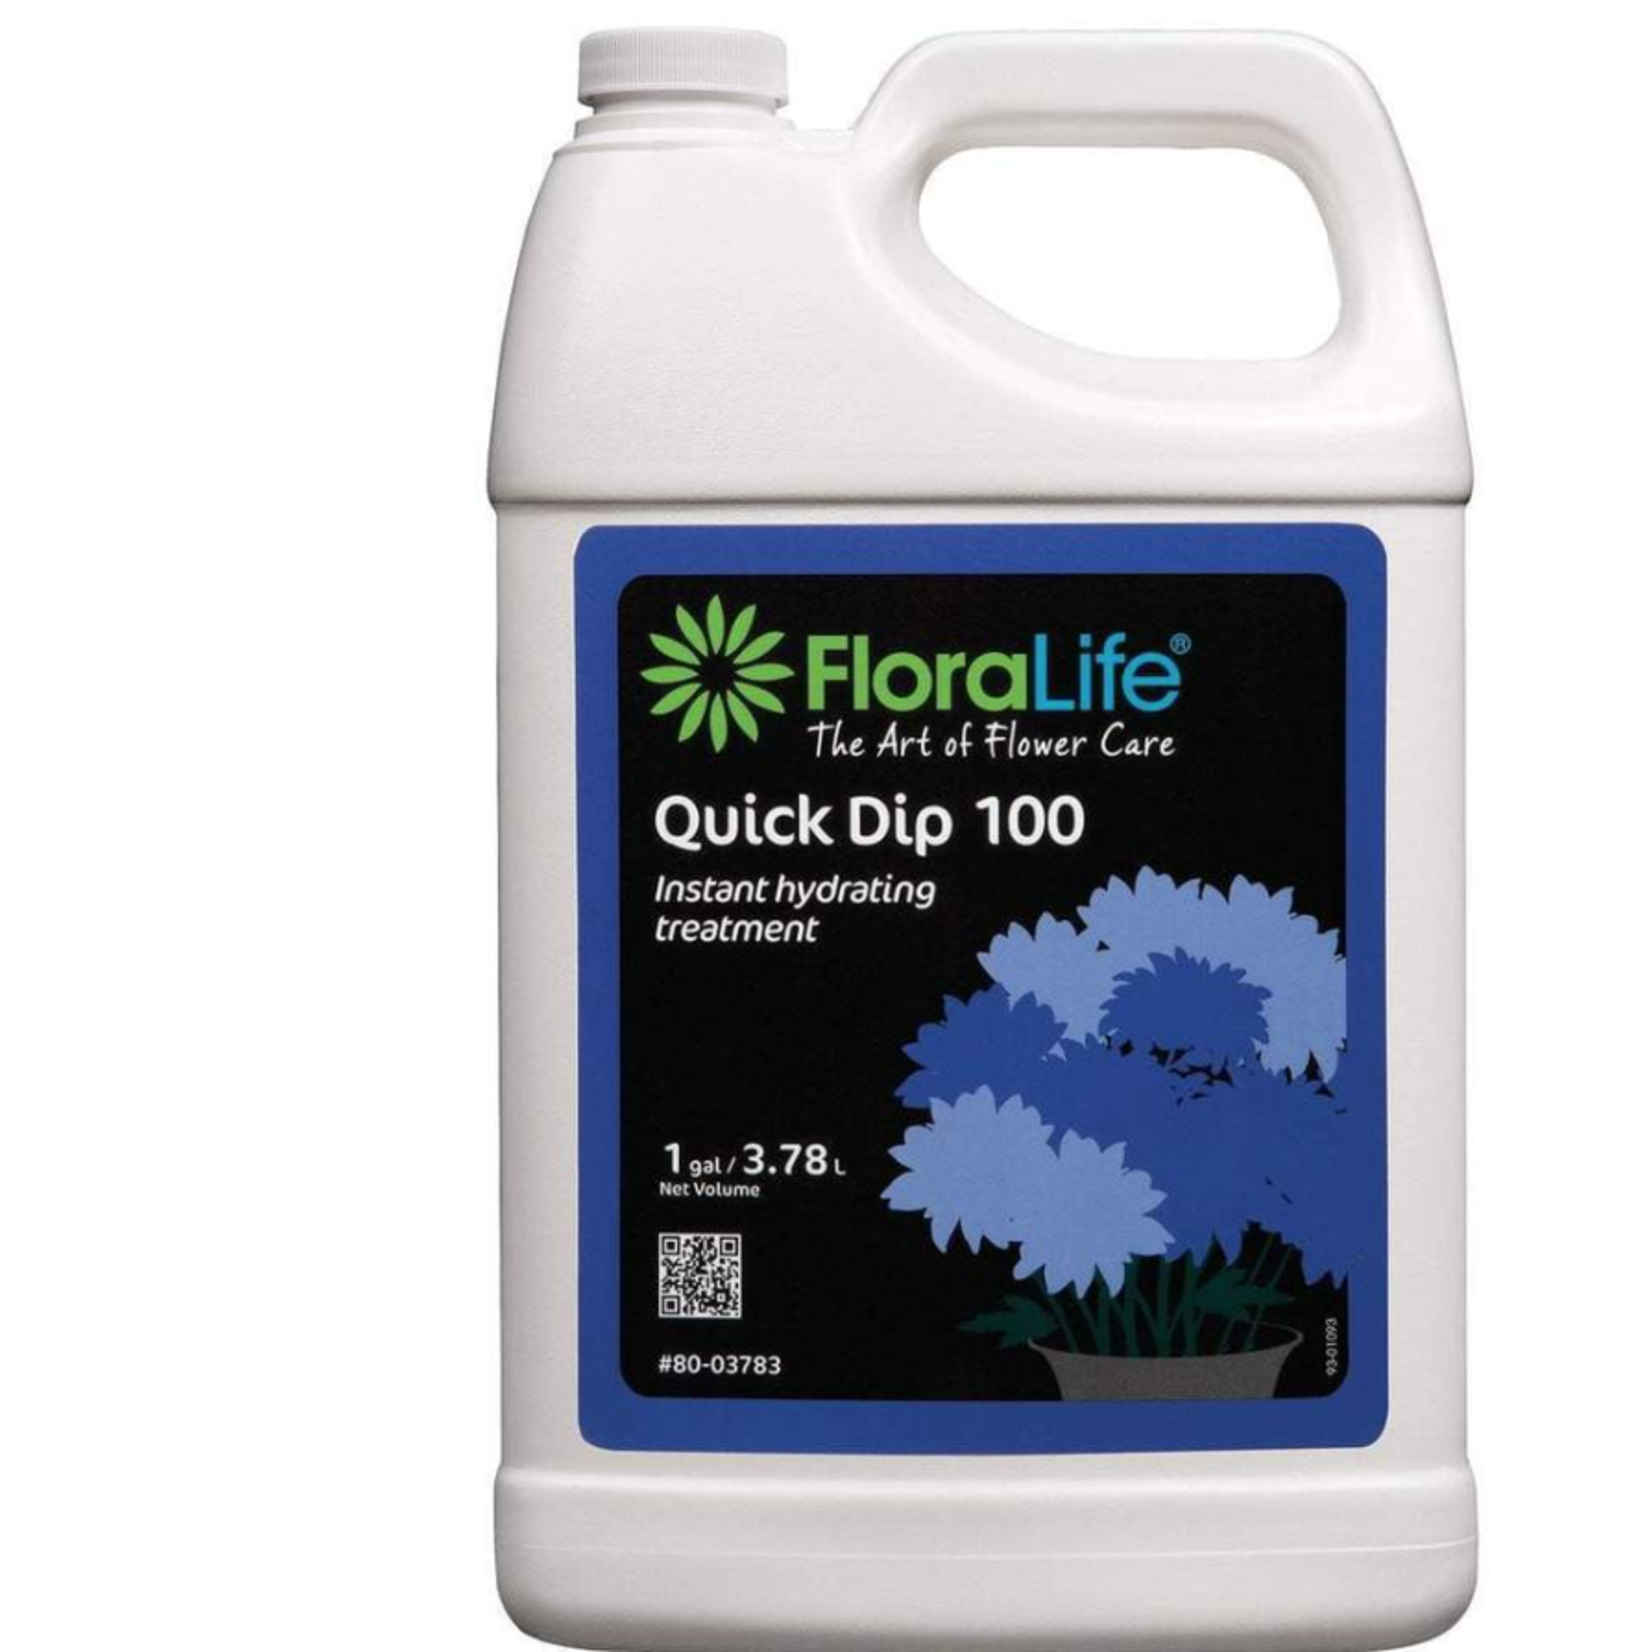 Floralife Quick Dip 100 - Instant hydrating treatment 1 gallon / 3.78 liters